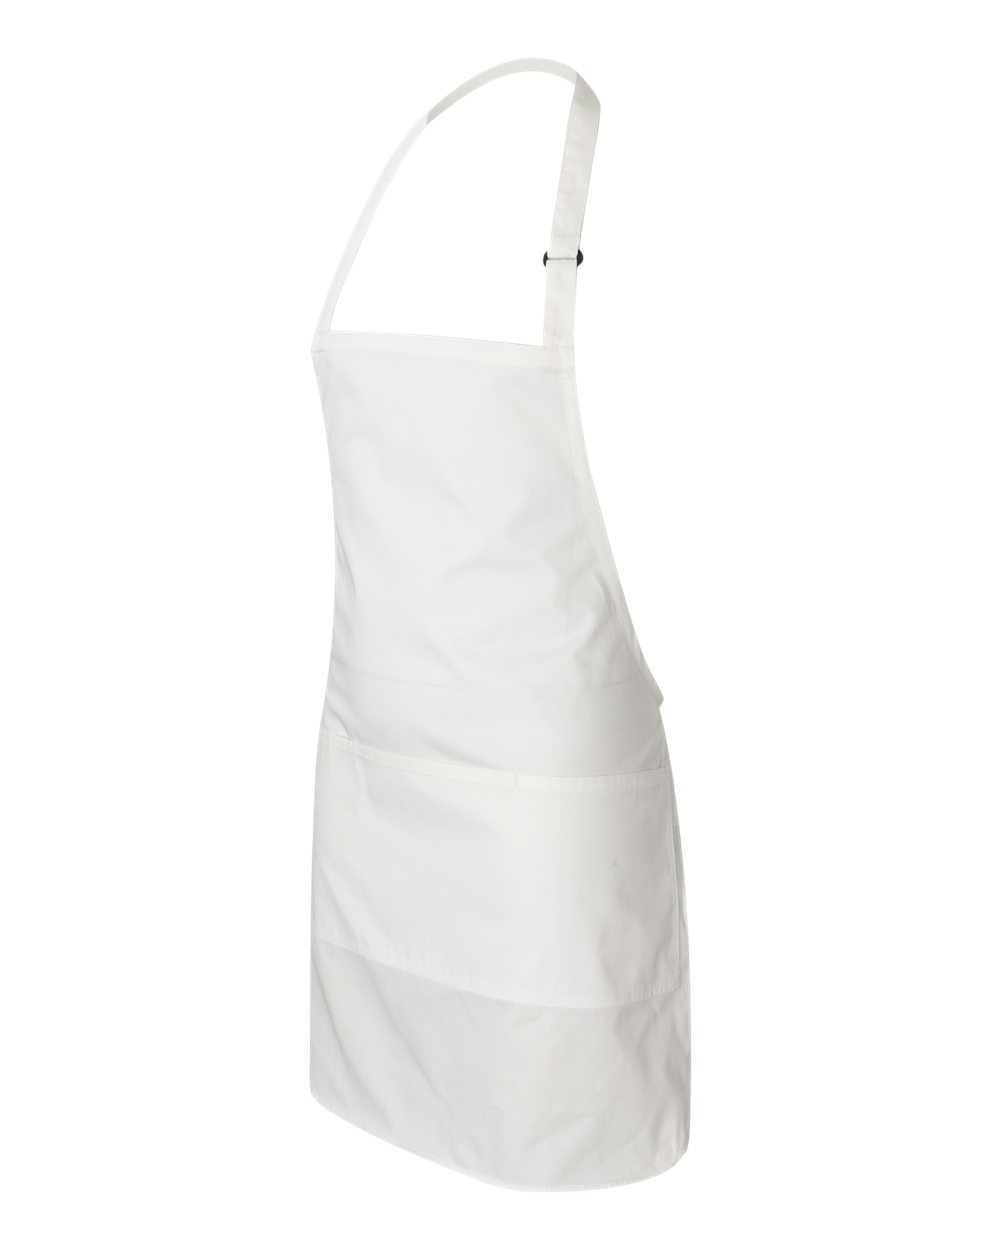 Full Apron Embroidery Blanks - ARCTIC WHITE